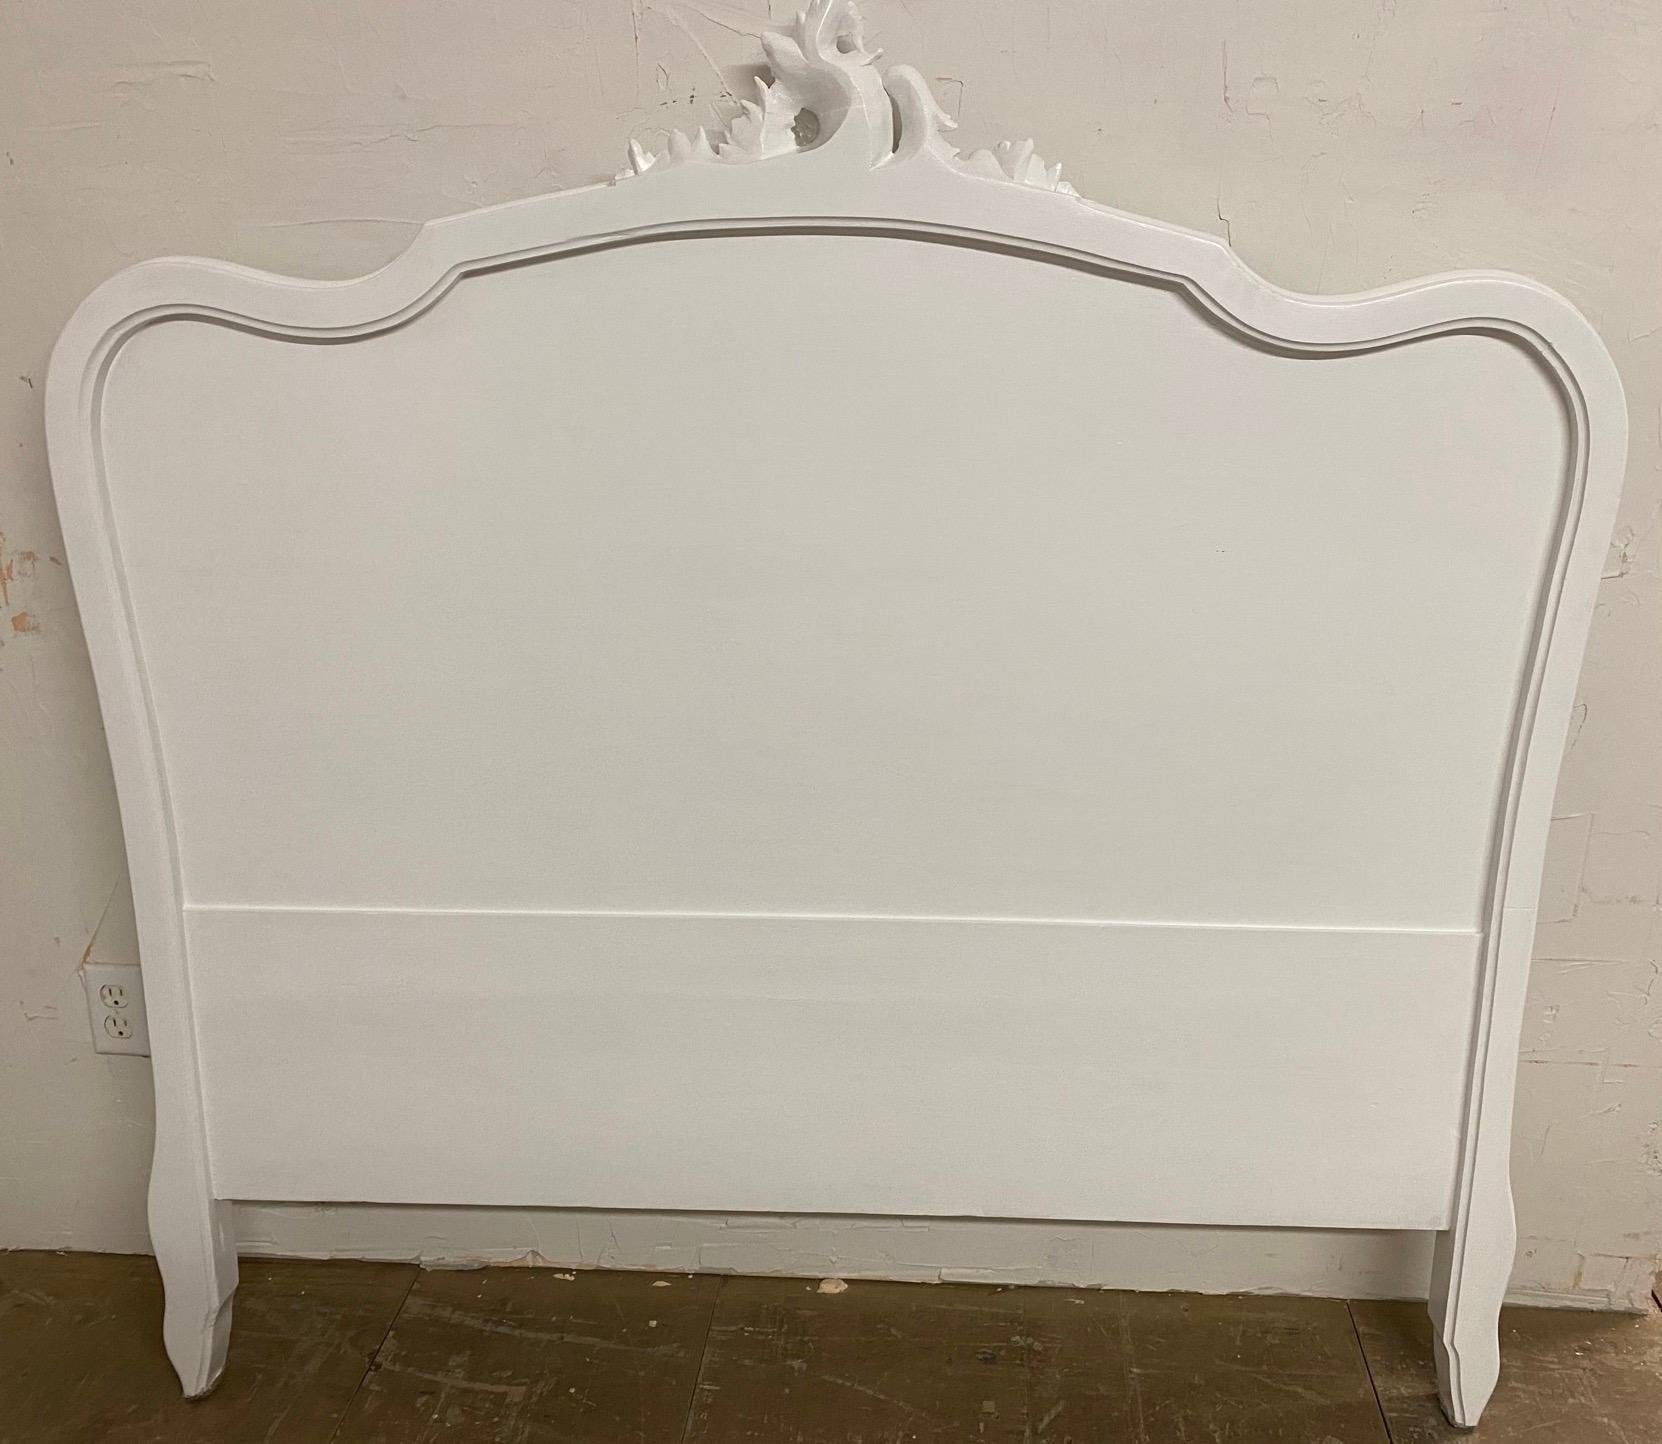 Double size Rococo Louis XV style carved French walnut bed painted white.  Nicely carved cabriole legs with shells and finely carved crest on head board.
Dimensions: 56